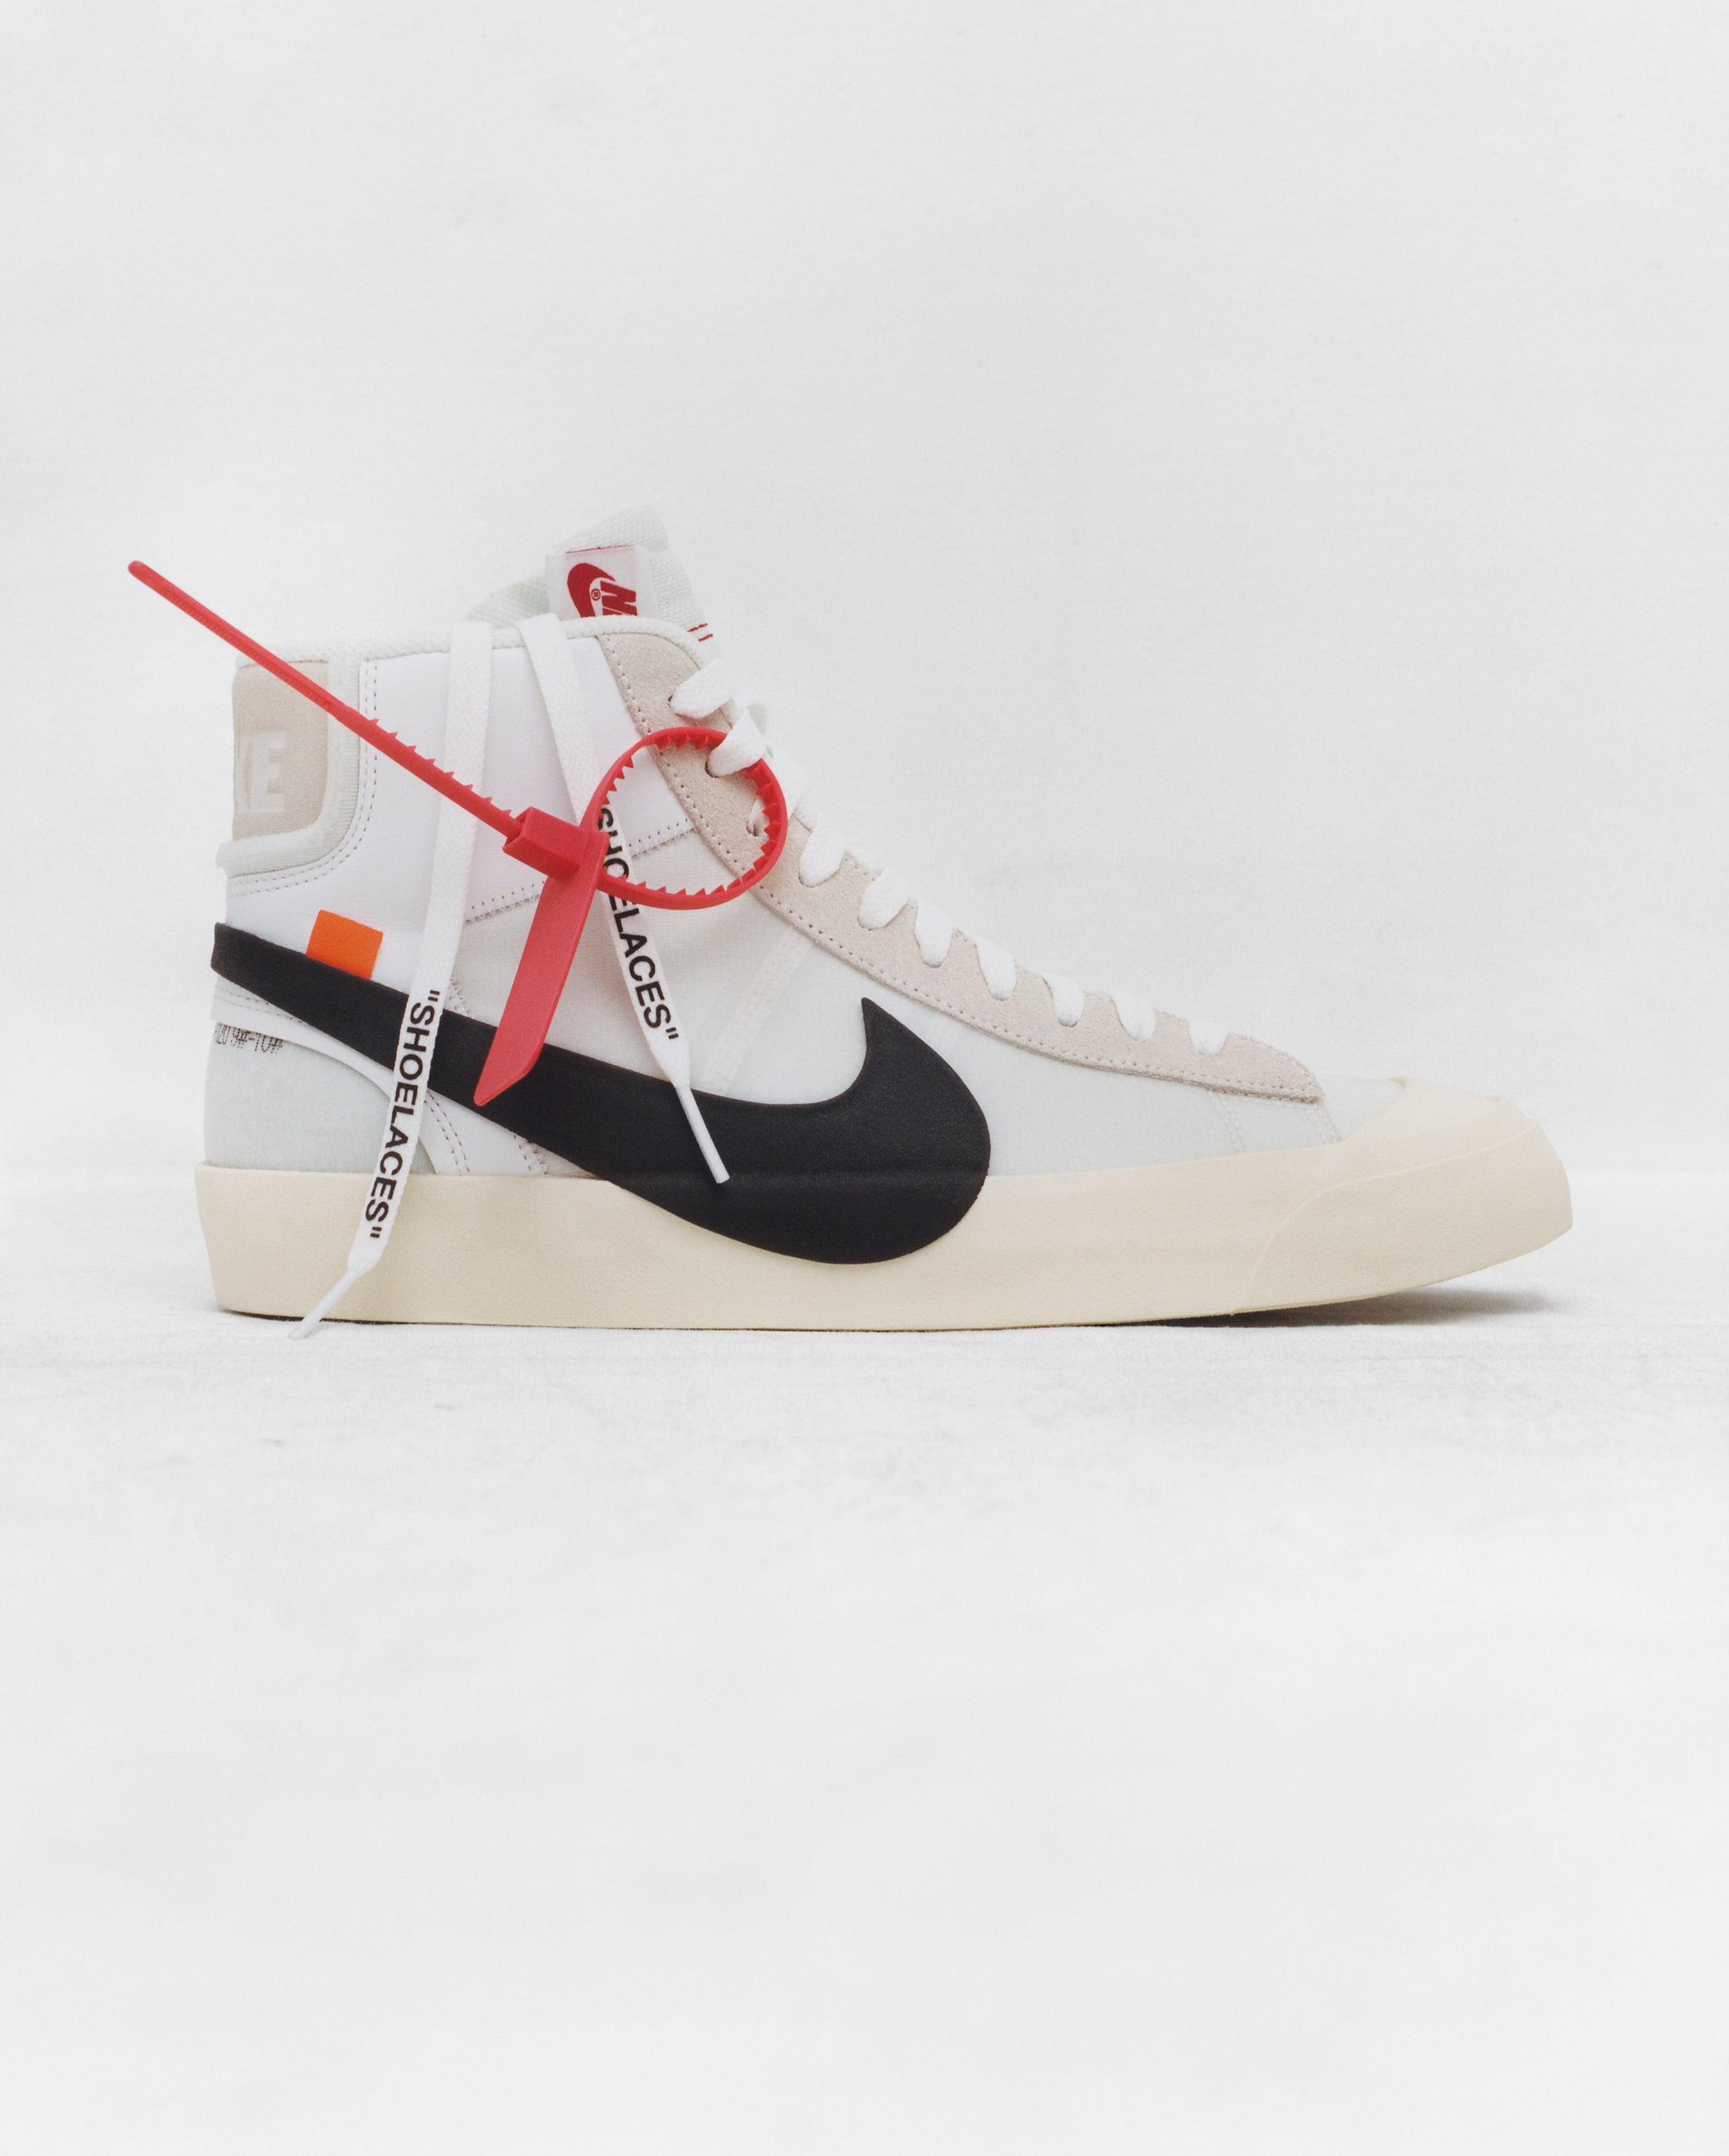 Buy Virgil Abloh Shoes. New Releases & Iconic Styles